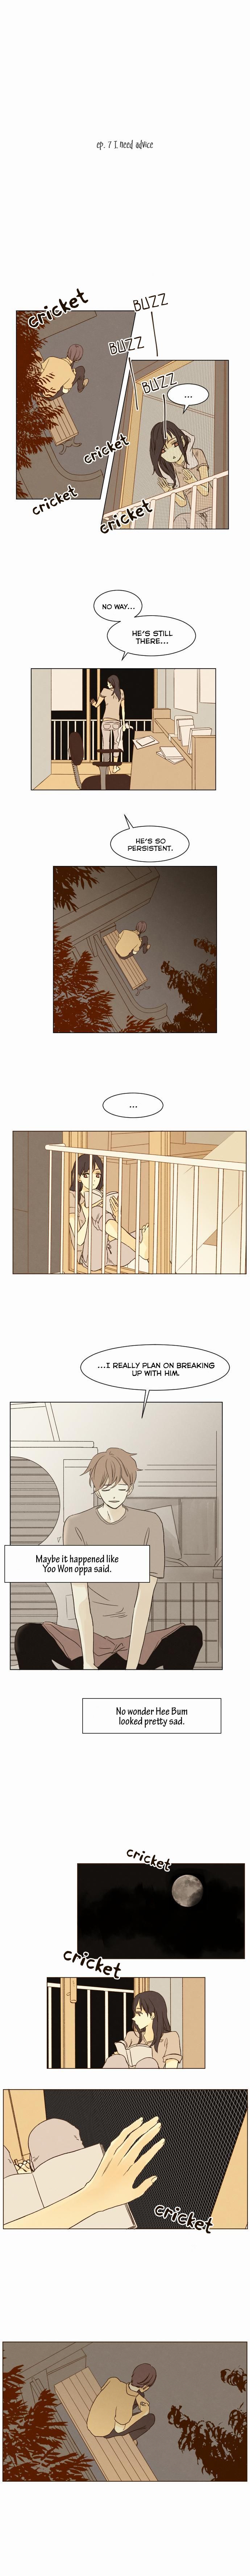 That Summer (KIM Hyun) Chapter 007 page 3